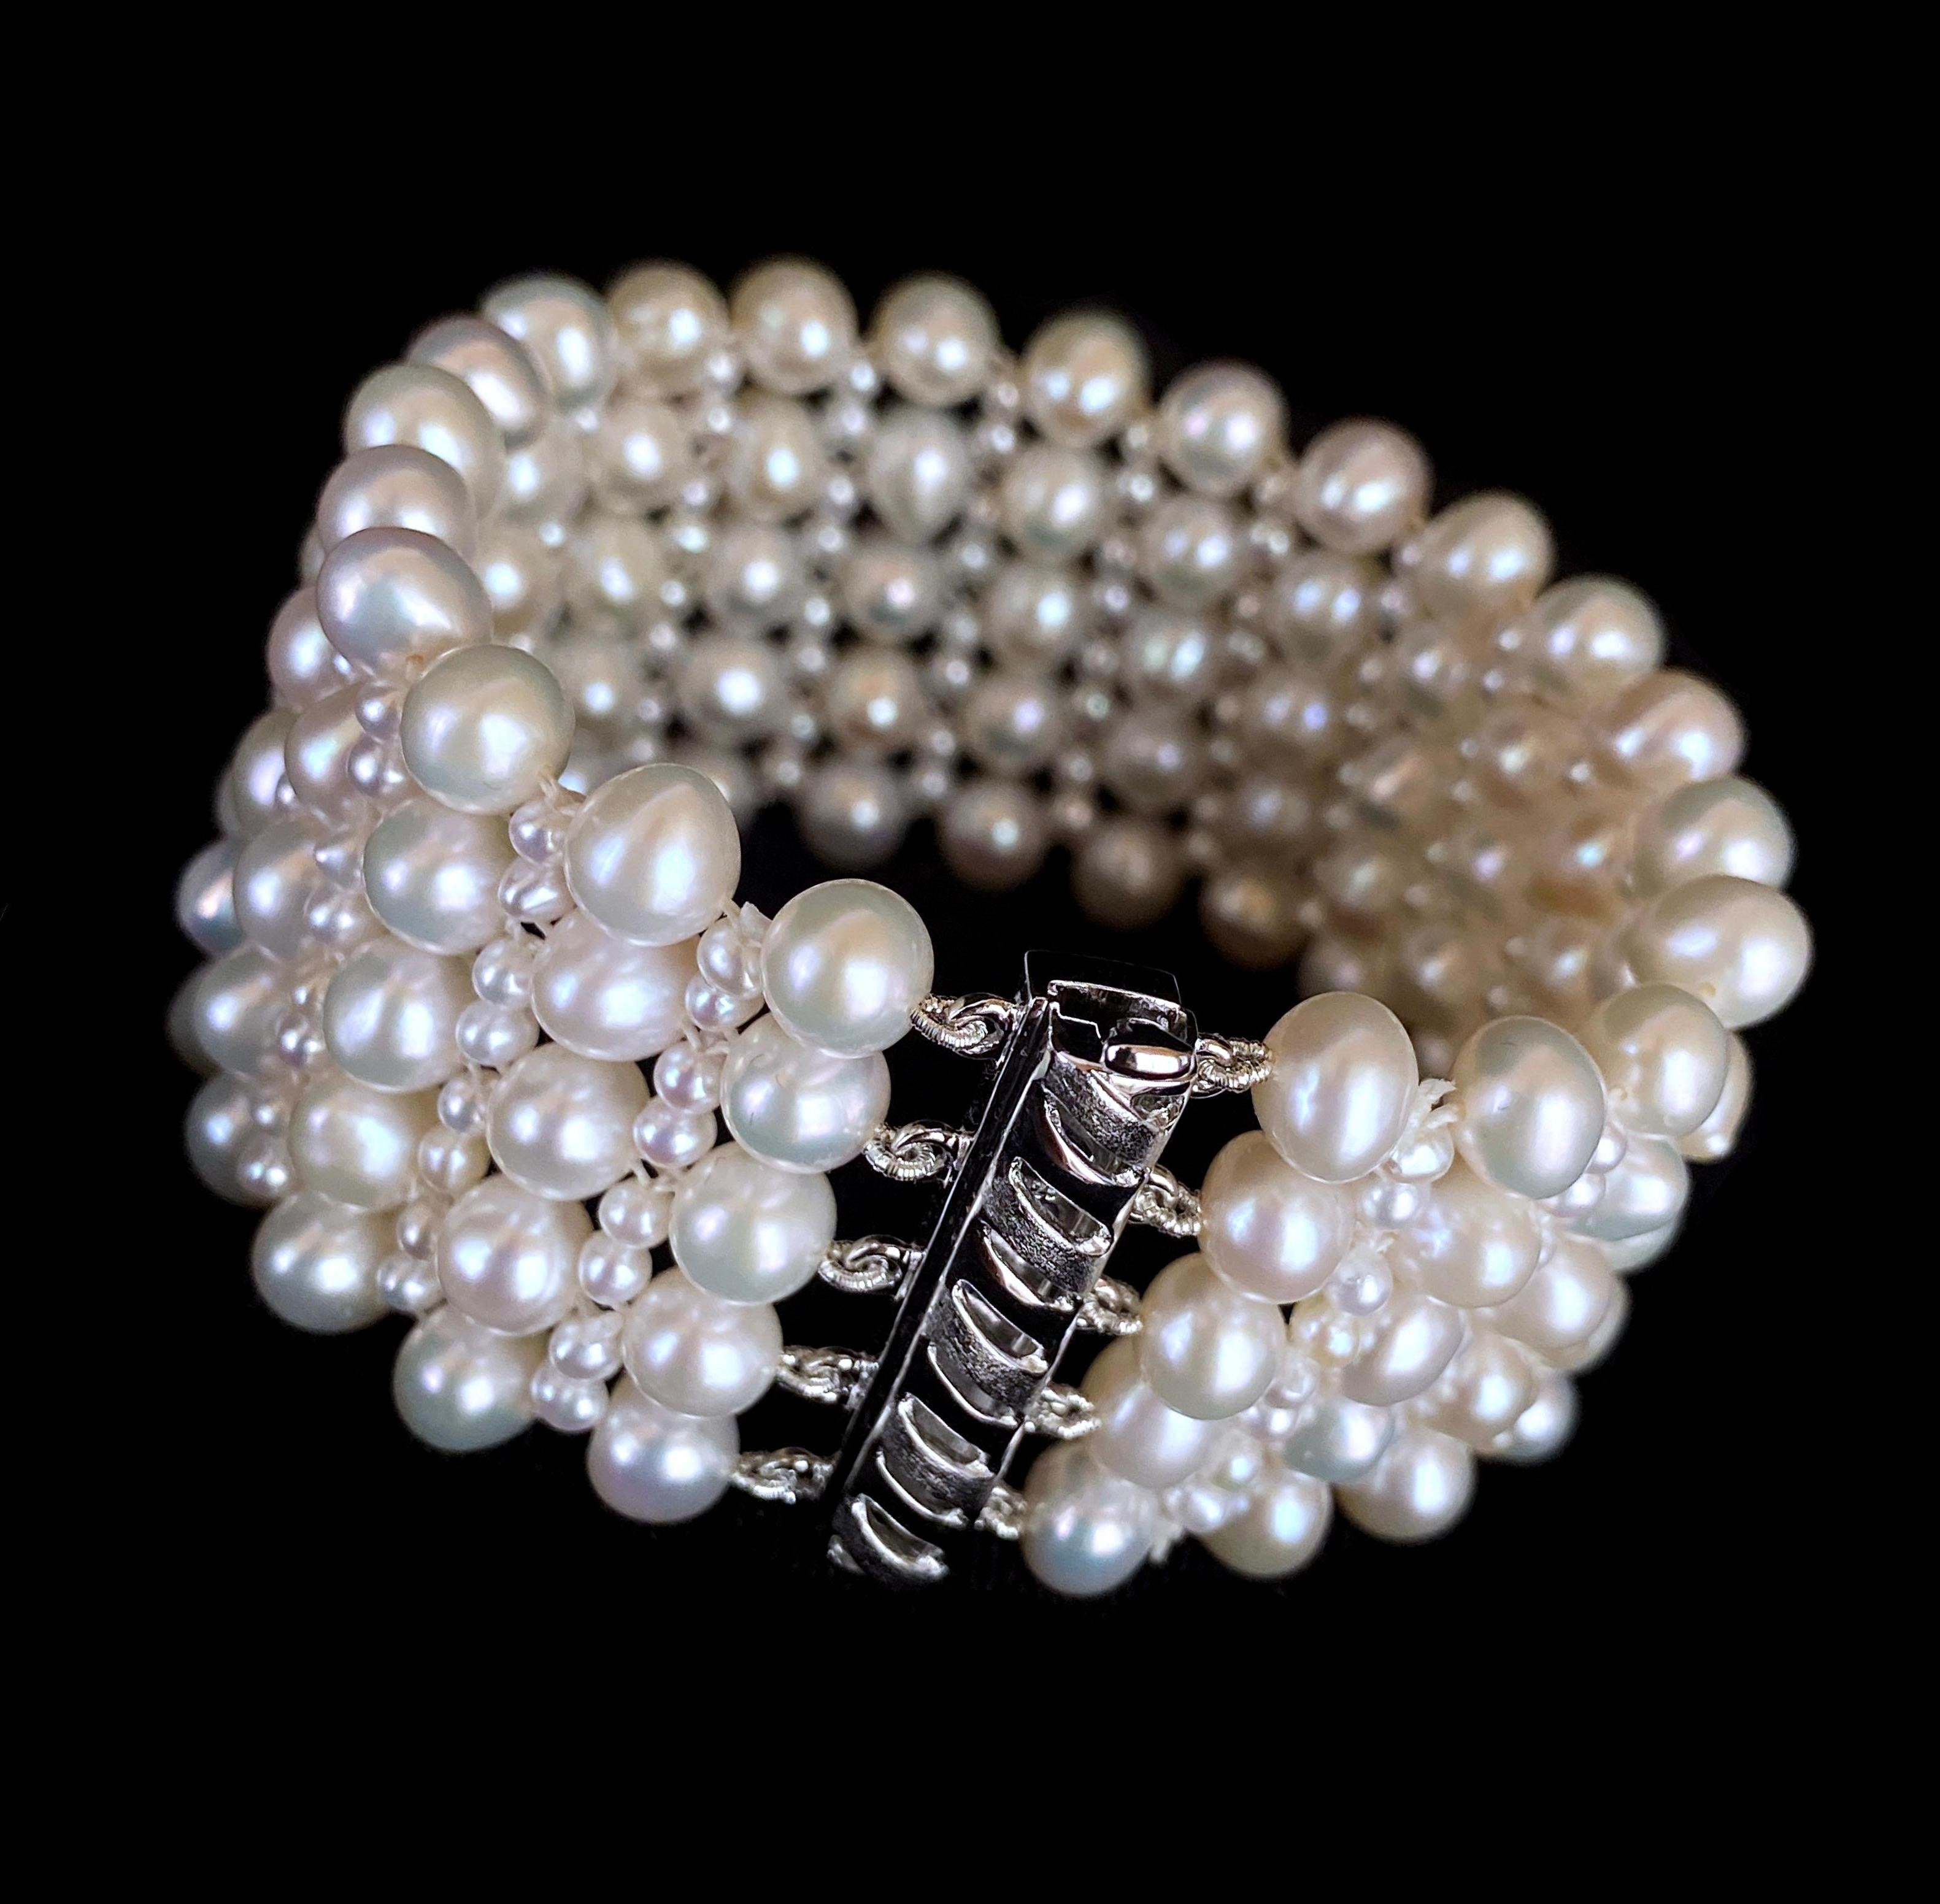 Classic piece by Marina J. This all Pearl bracelet is made of multi shaped Pearls all intricately woven into a tight lace like design. An elegant bracelet perfect for bridal or any formal occasions. Measuring 1 inch thick and 7 inches long, this